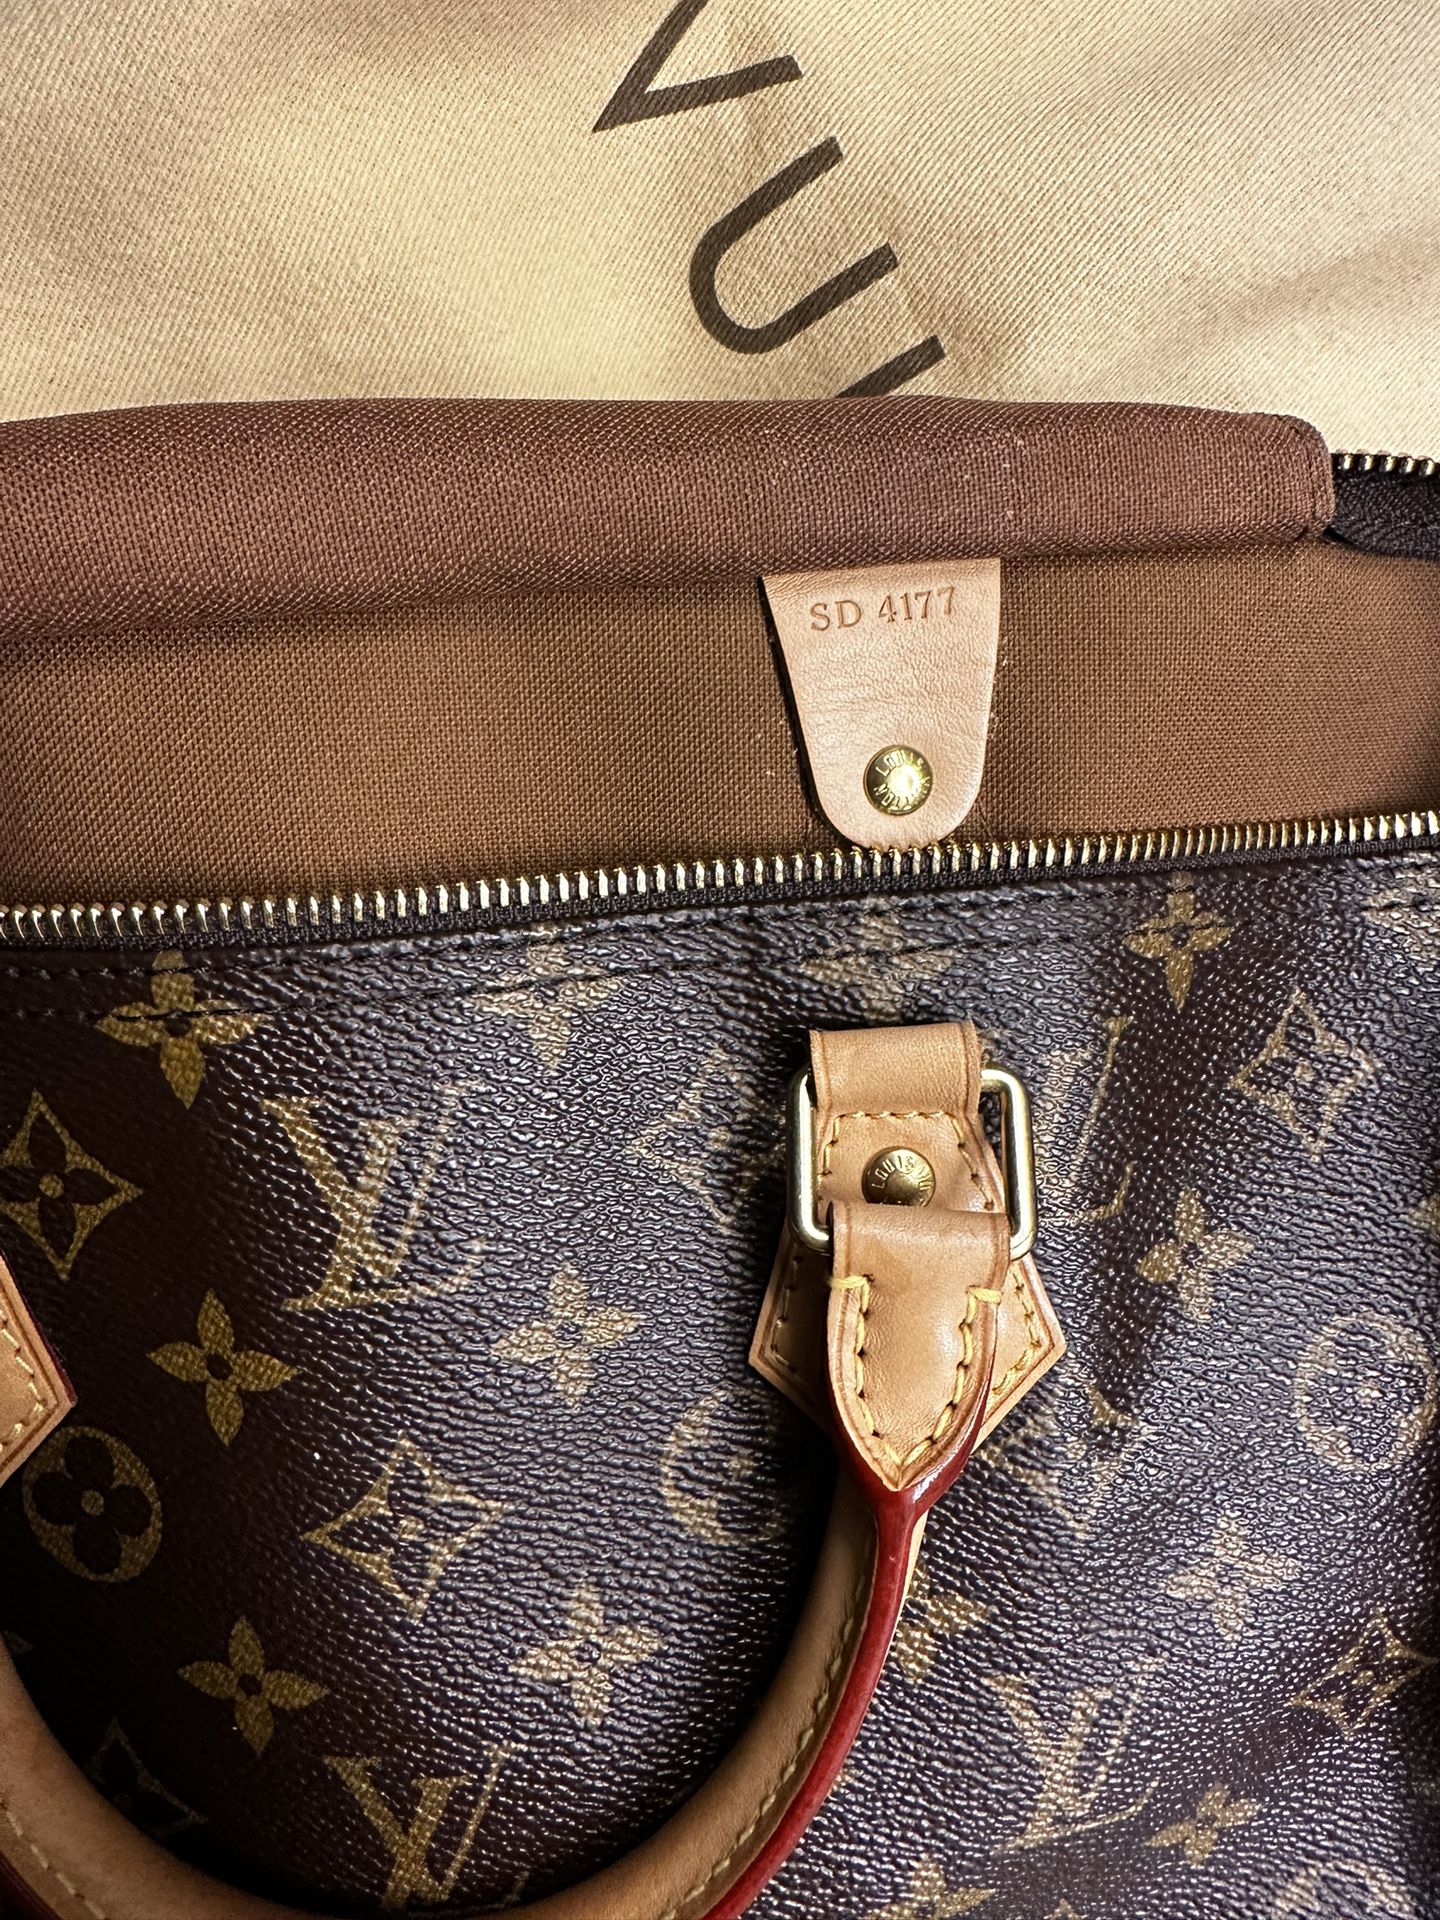 Louis Vuitton Speedy 40 For Sale In Akron, Oh